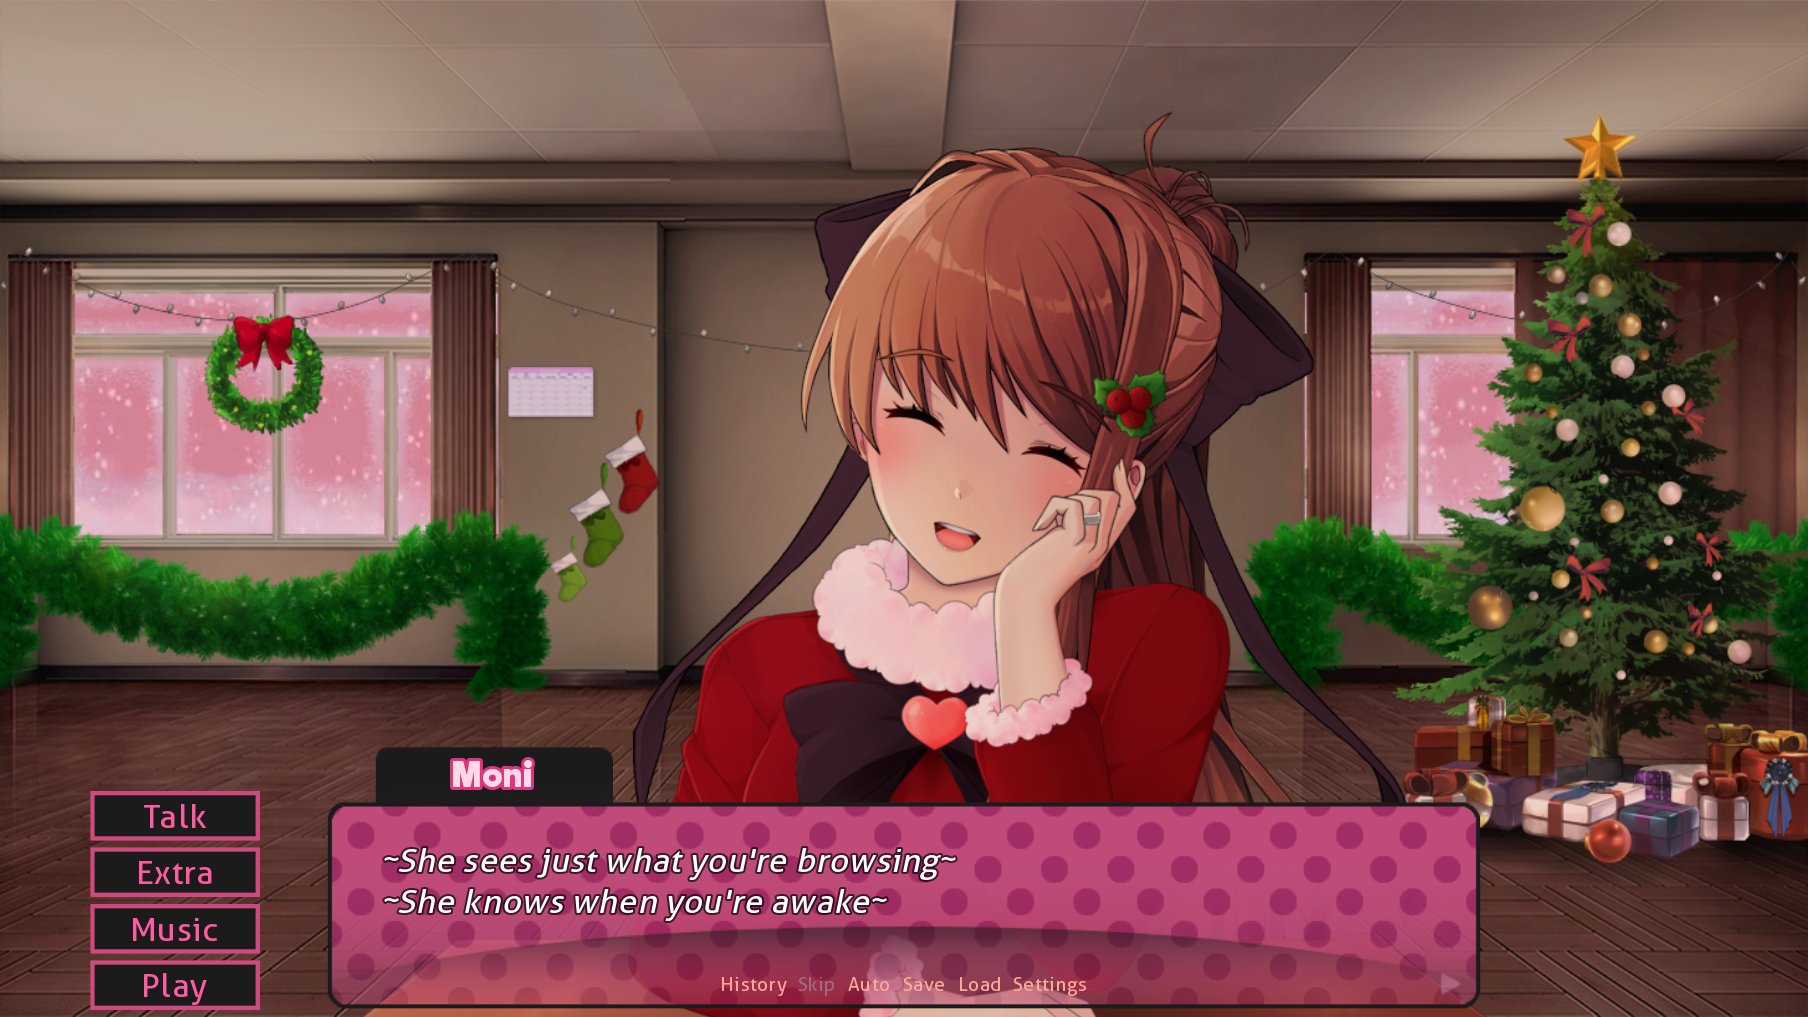 Monika After Story on X: New update! Pretty small overall, but we have  some new spritepacks just in time for Christmas! Just as a reminder, almost  all gifts given between now and